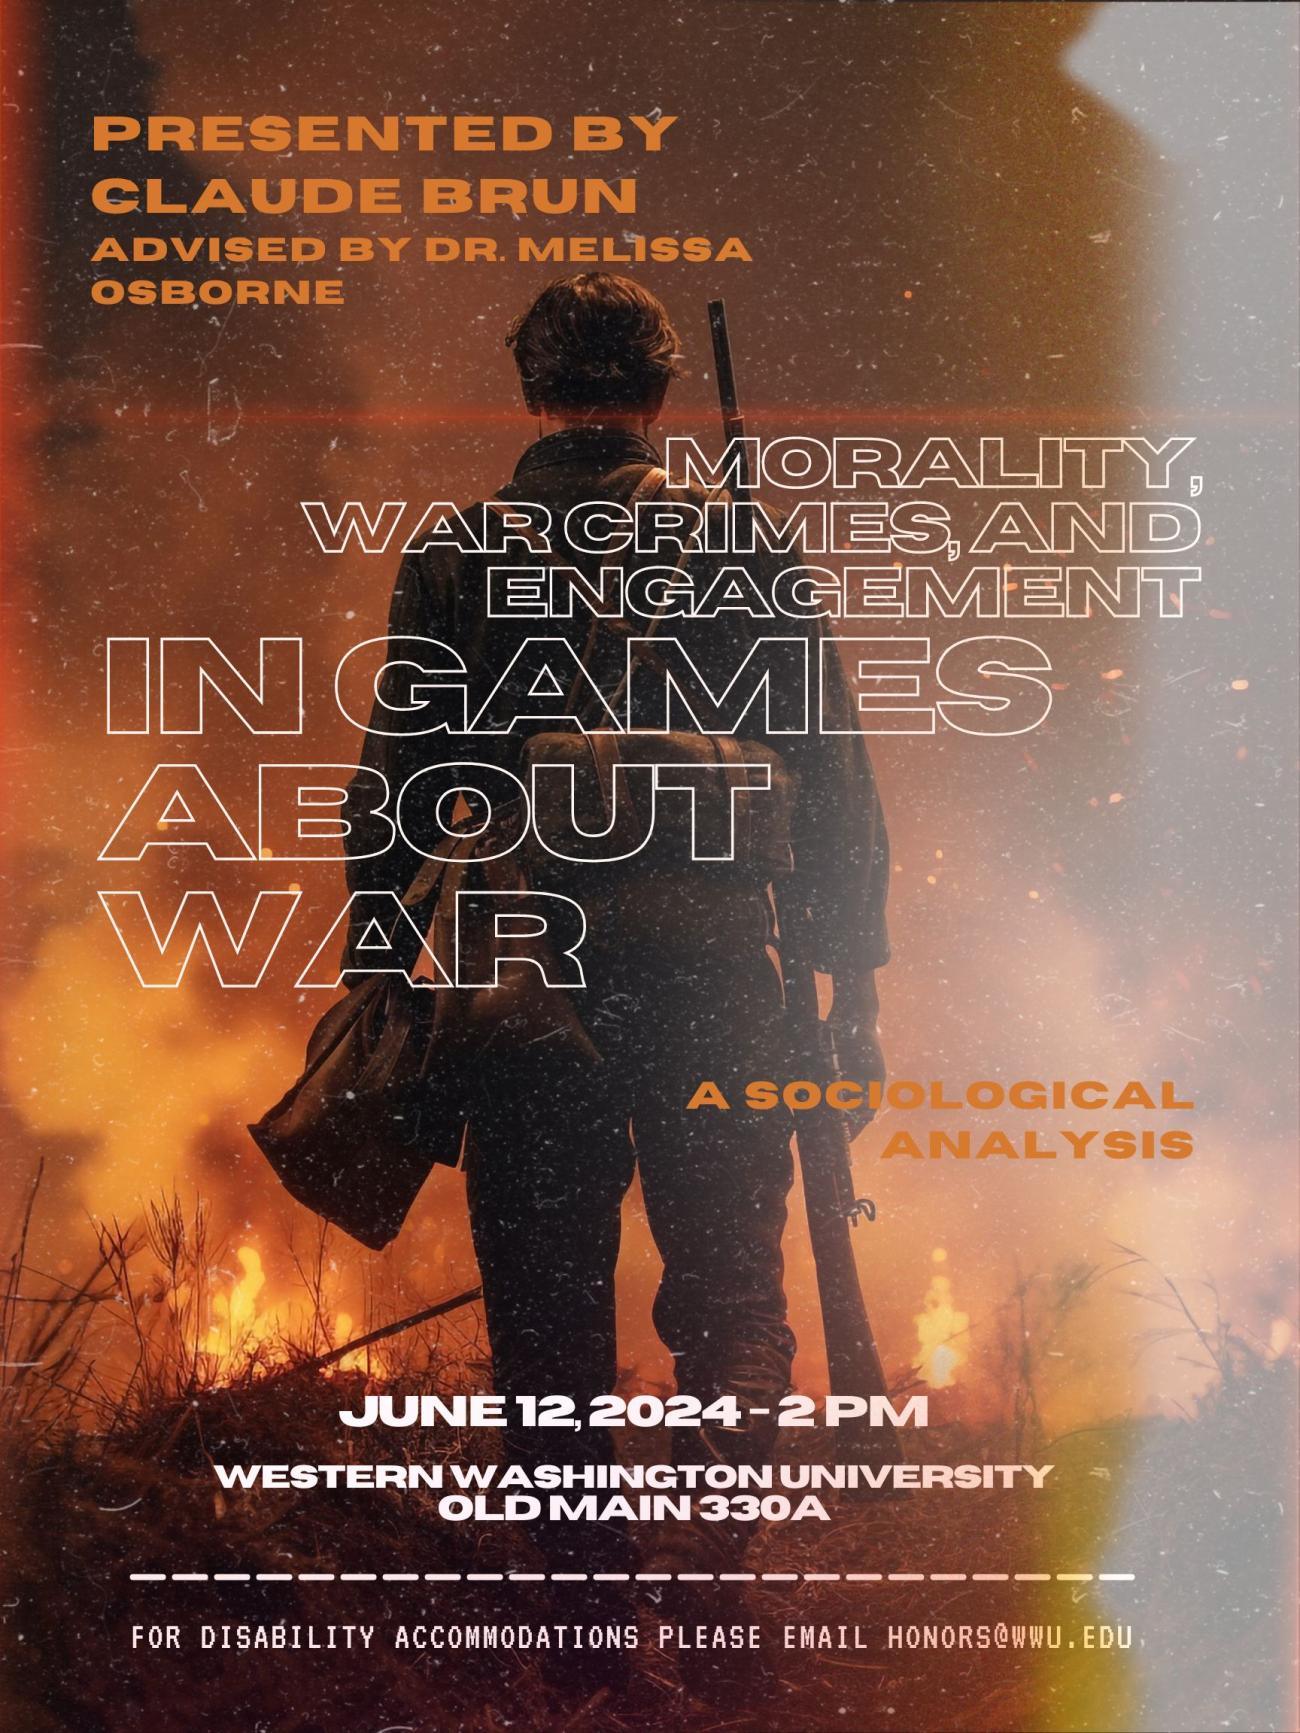 Background of a soldier with a rifle slung over his right shoulder facing away from the camera, walking towards fire. There is a grainy, damaged film filter over top. Text reads "Presented by Claude Brun, Advised by Melissa Osborne. Morality, War crimes, and Engagement in Games About War. A Sociological Analysis. June 12, 2024 - 2 pm. Westerm Washington University. Old Main 330A. For disability accommodations please email Honors@wwu.edu."